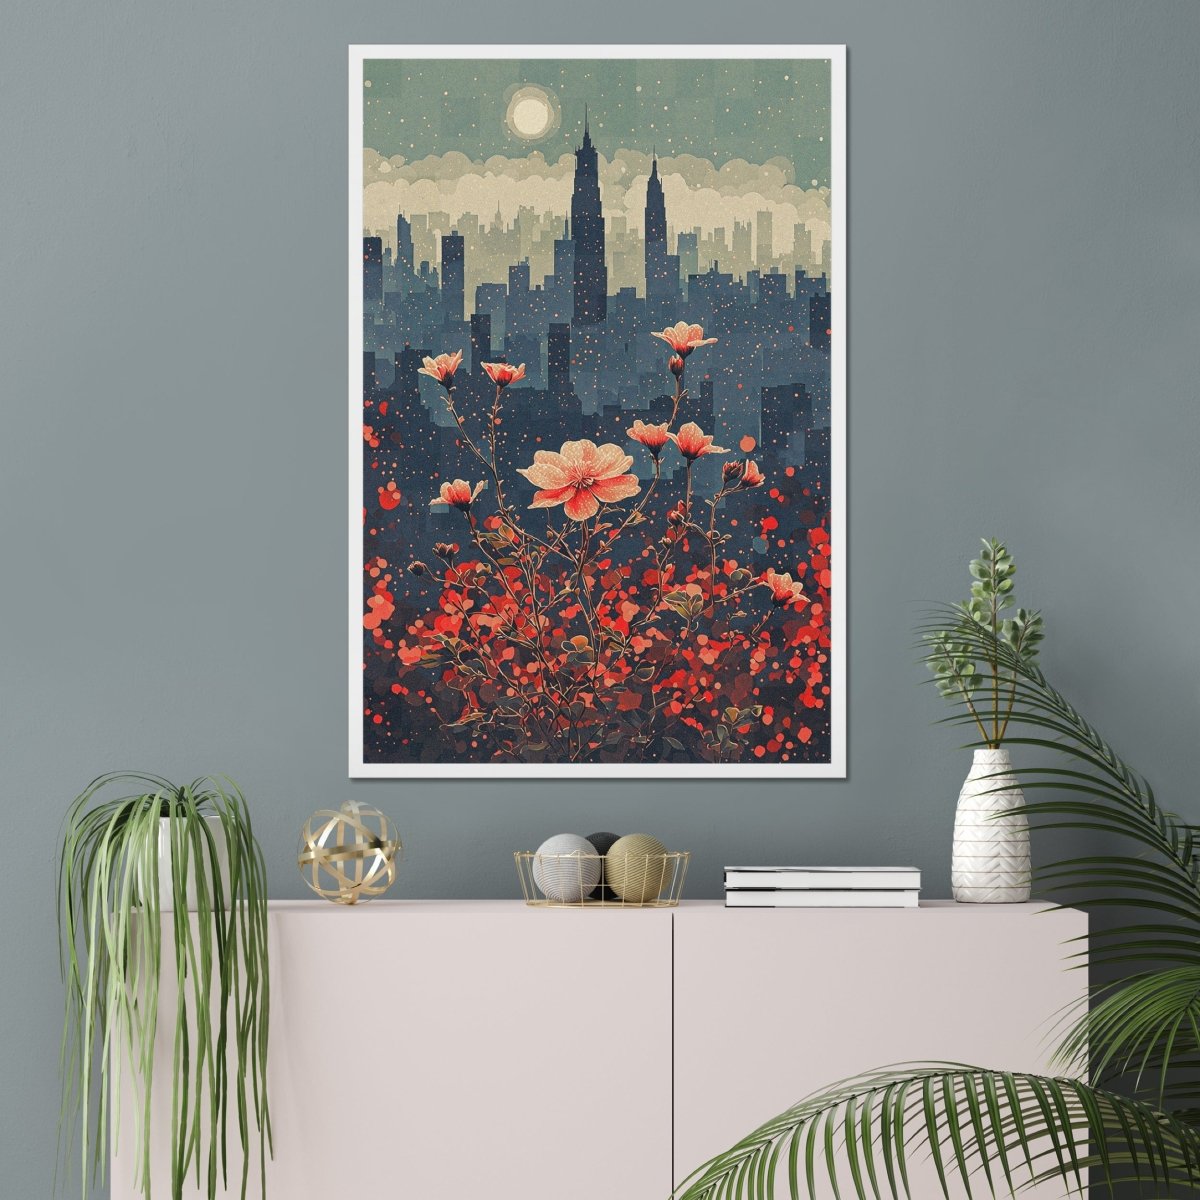 Floral harmony - Art print - Poster - Ever colorful